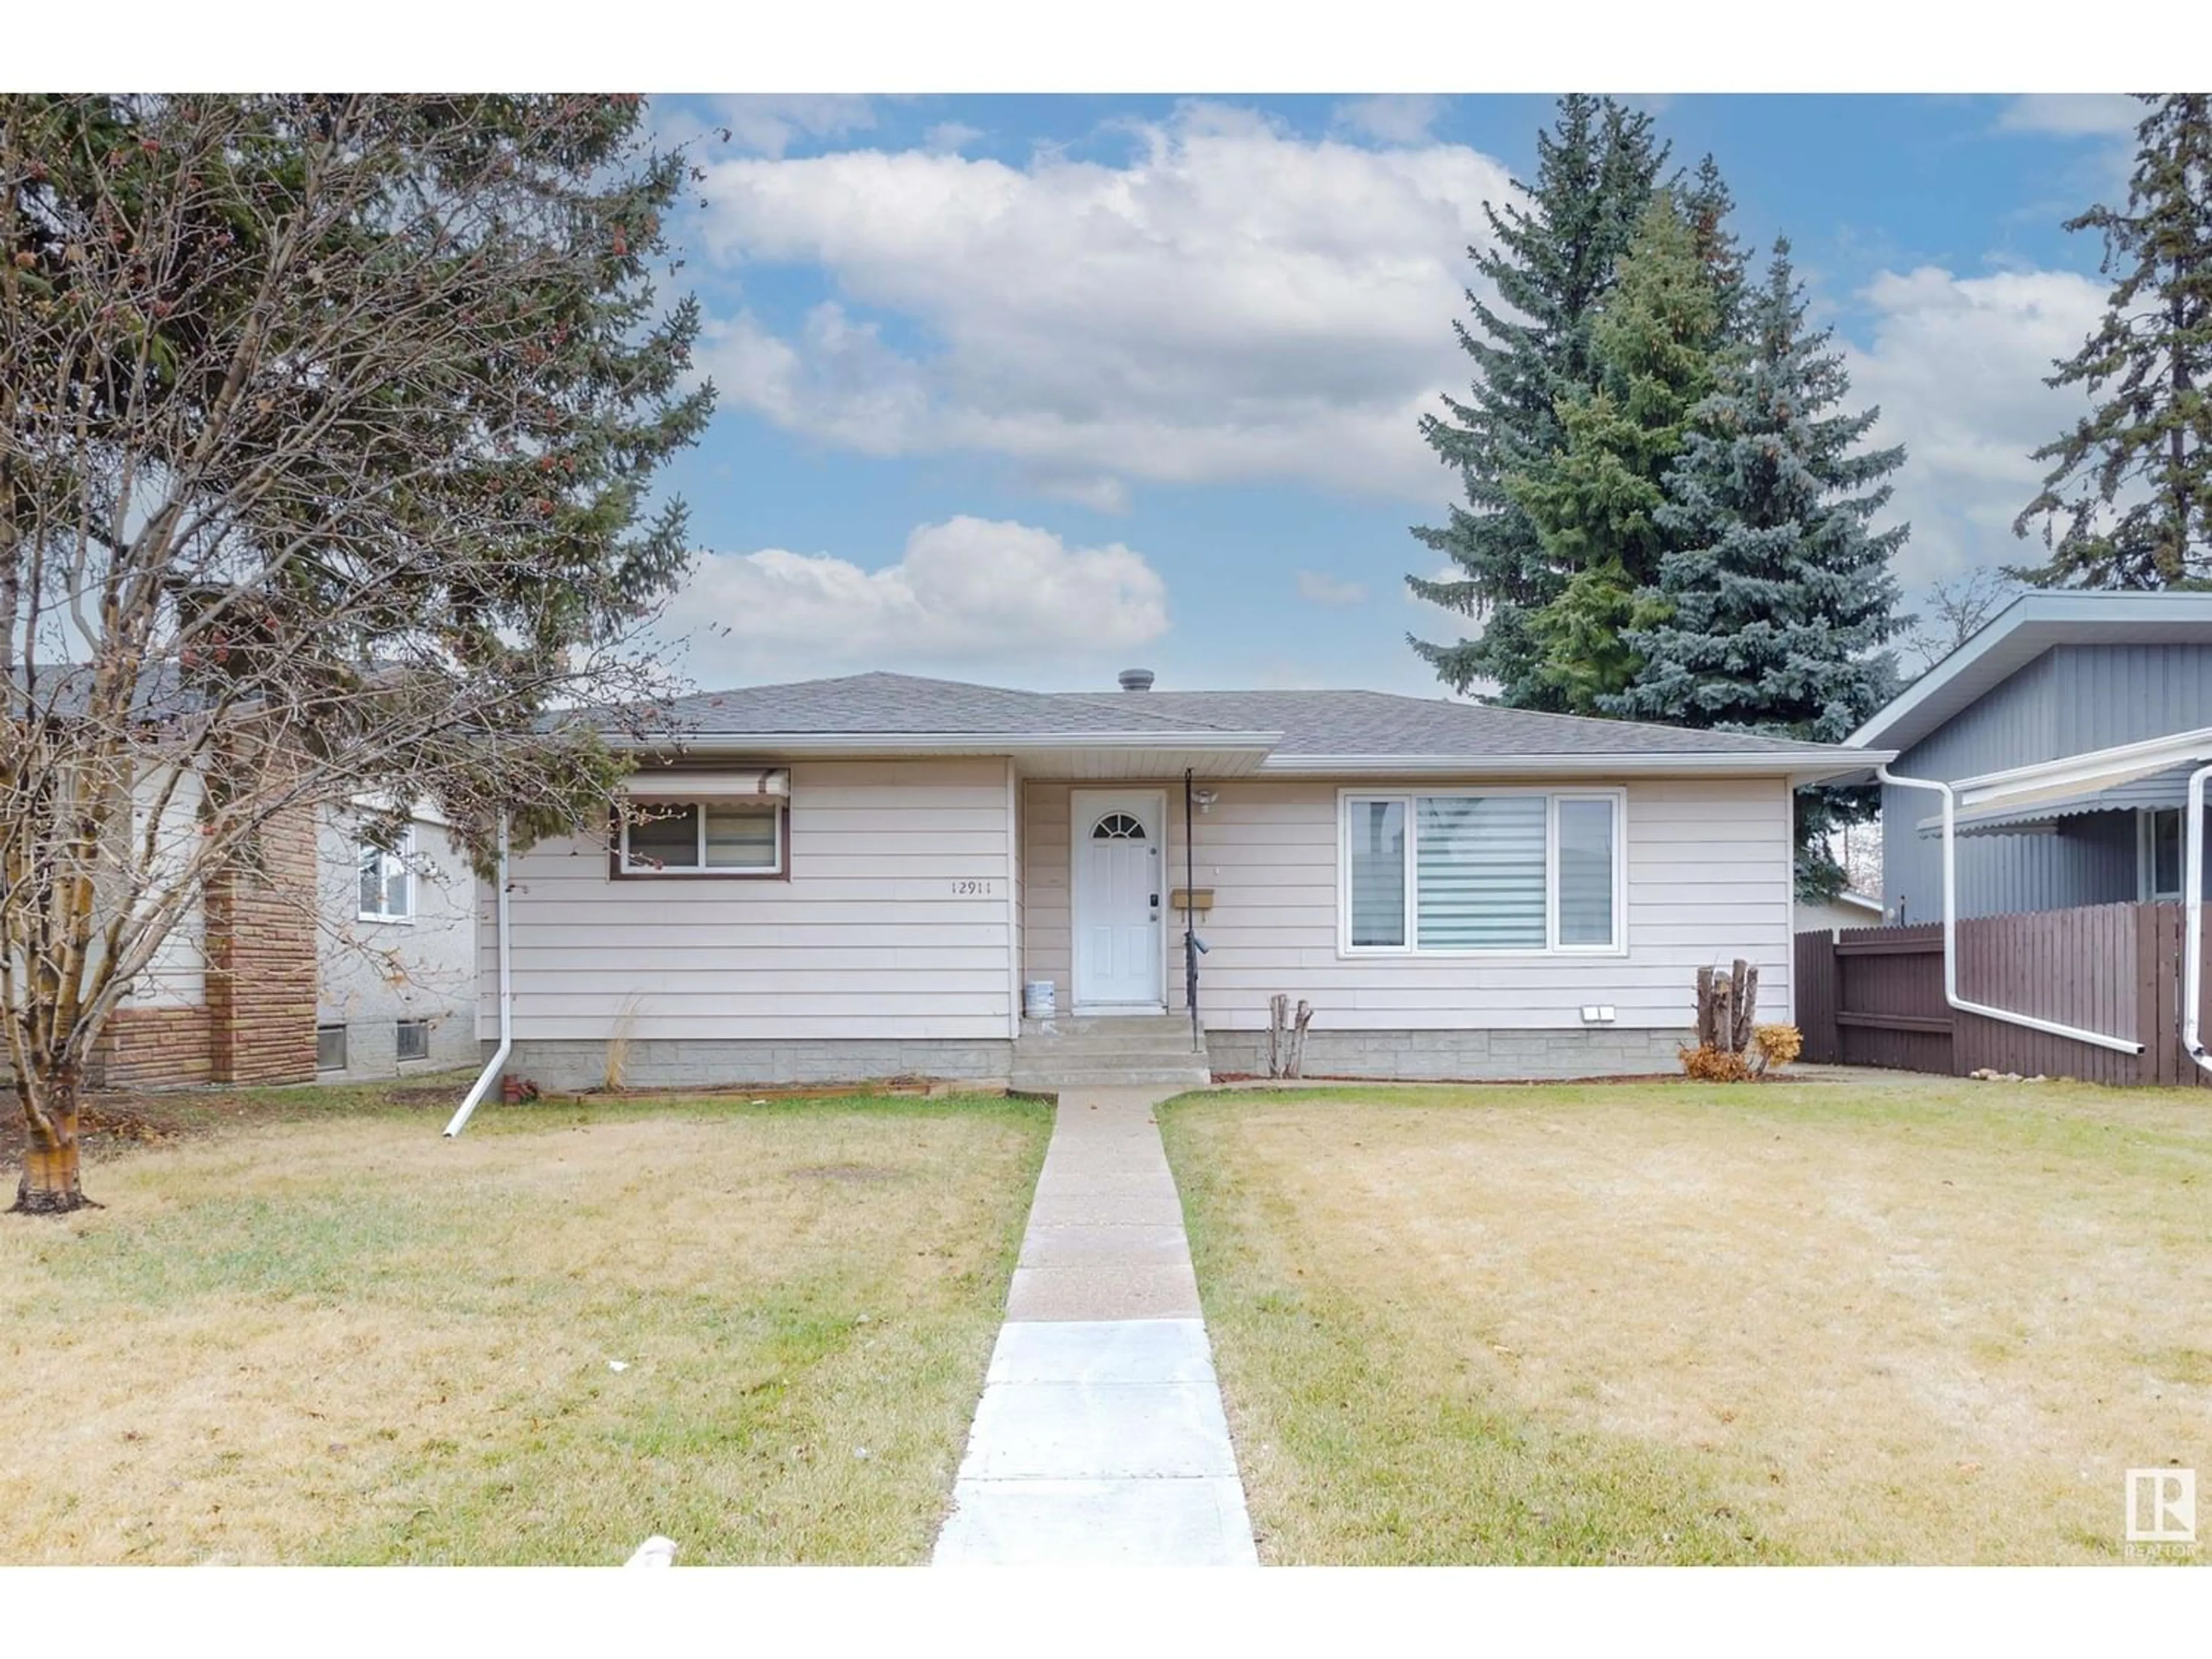 Frontside or backside of a home for 12911 88 ST NW, Edmonton Alberta T5E3H2